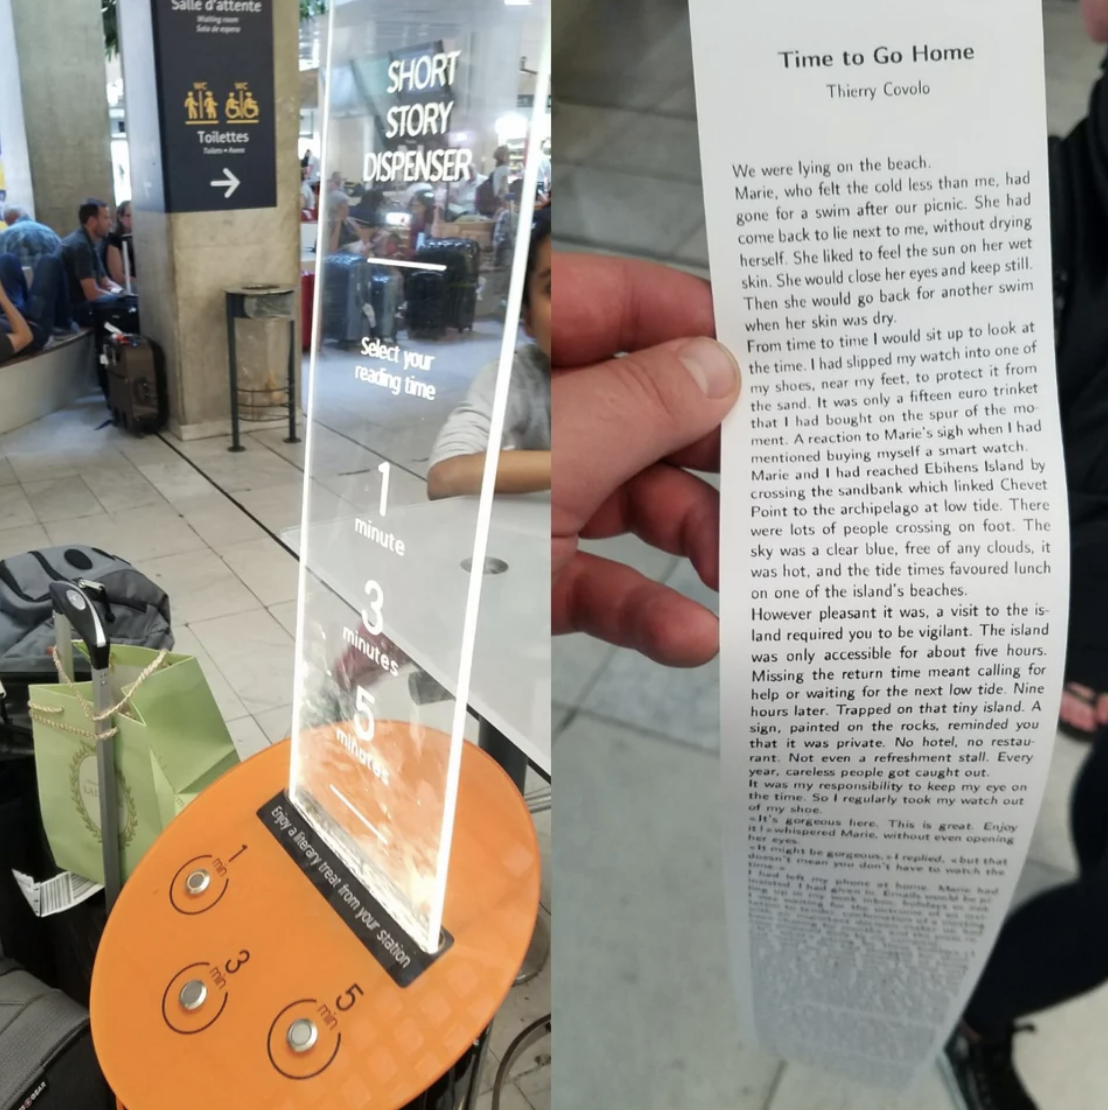 A printed short story for waiting at the airport